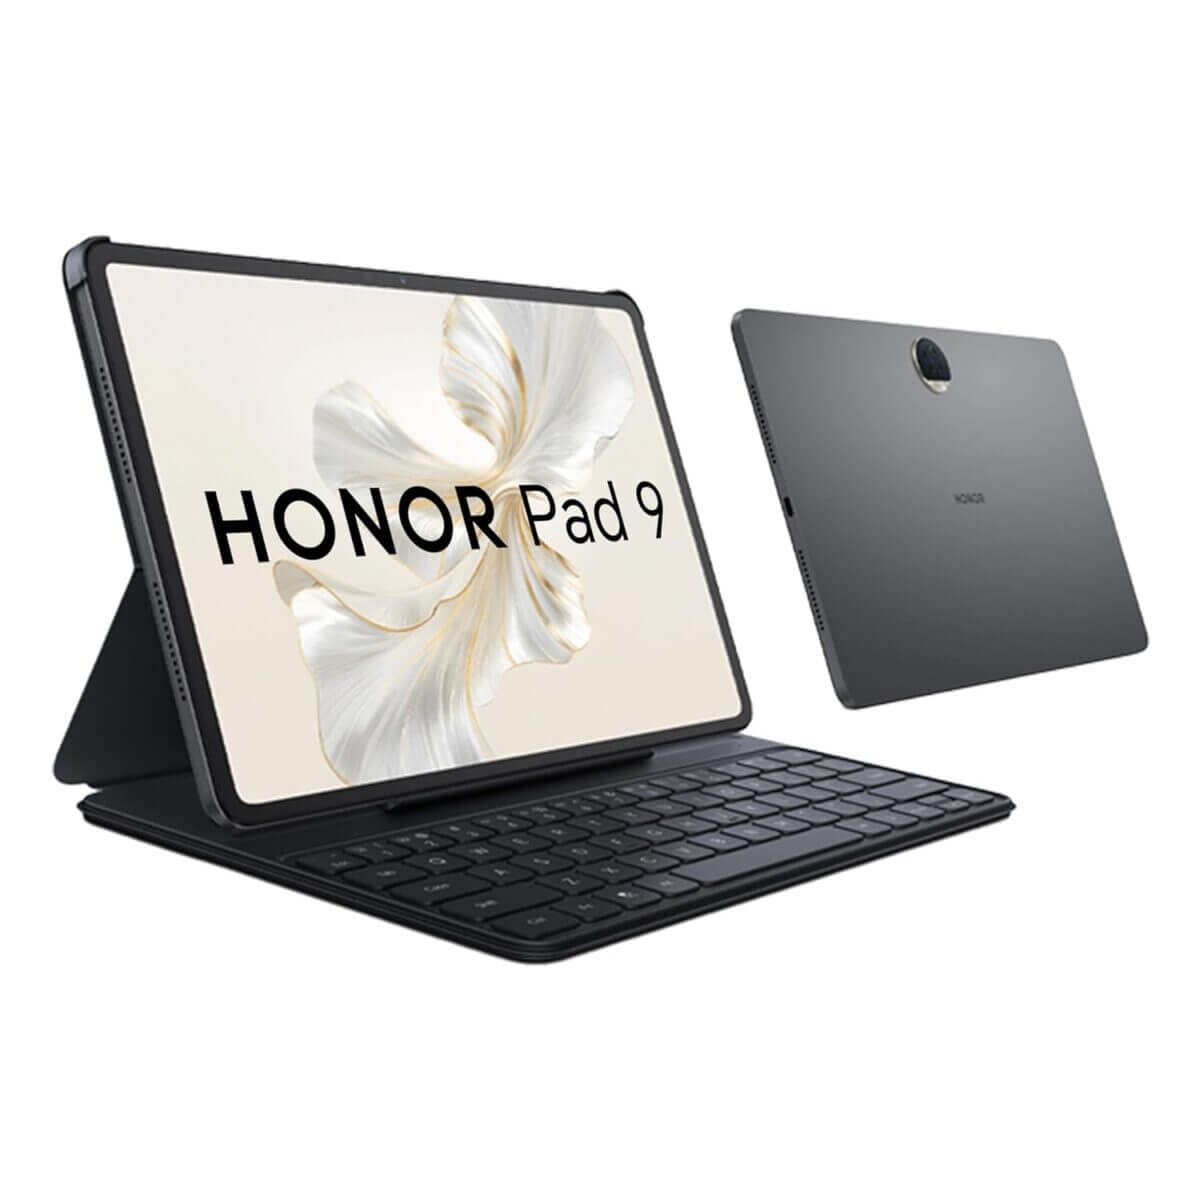 honor pad 9 tablet